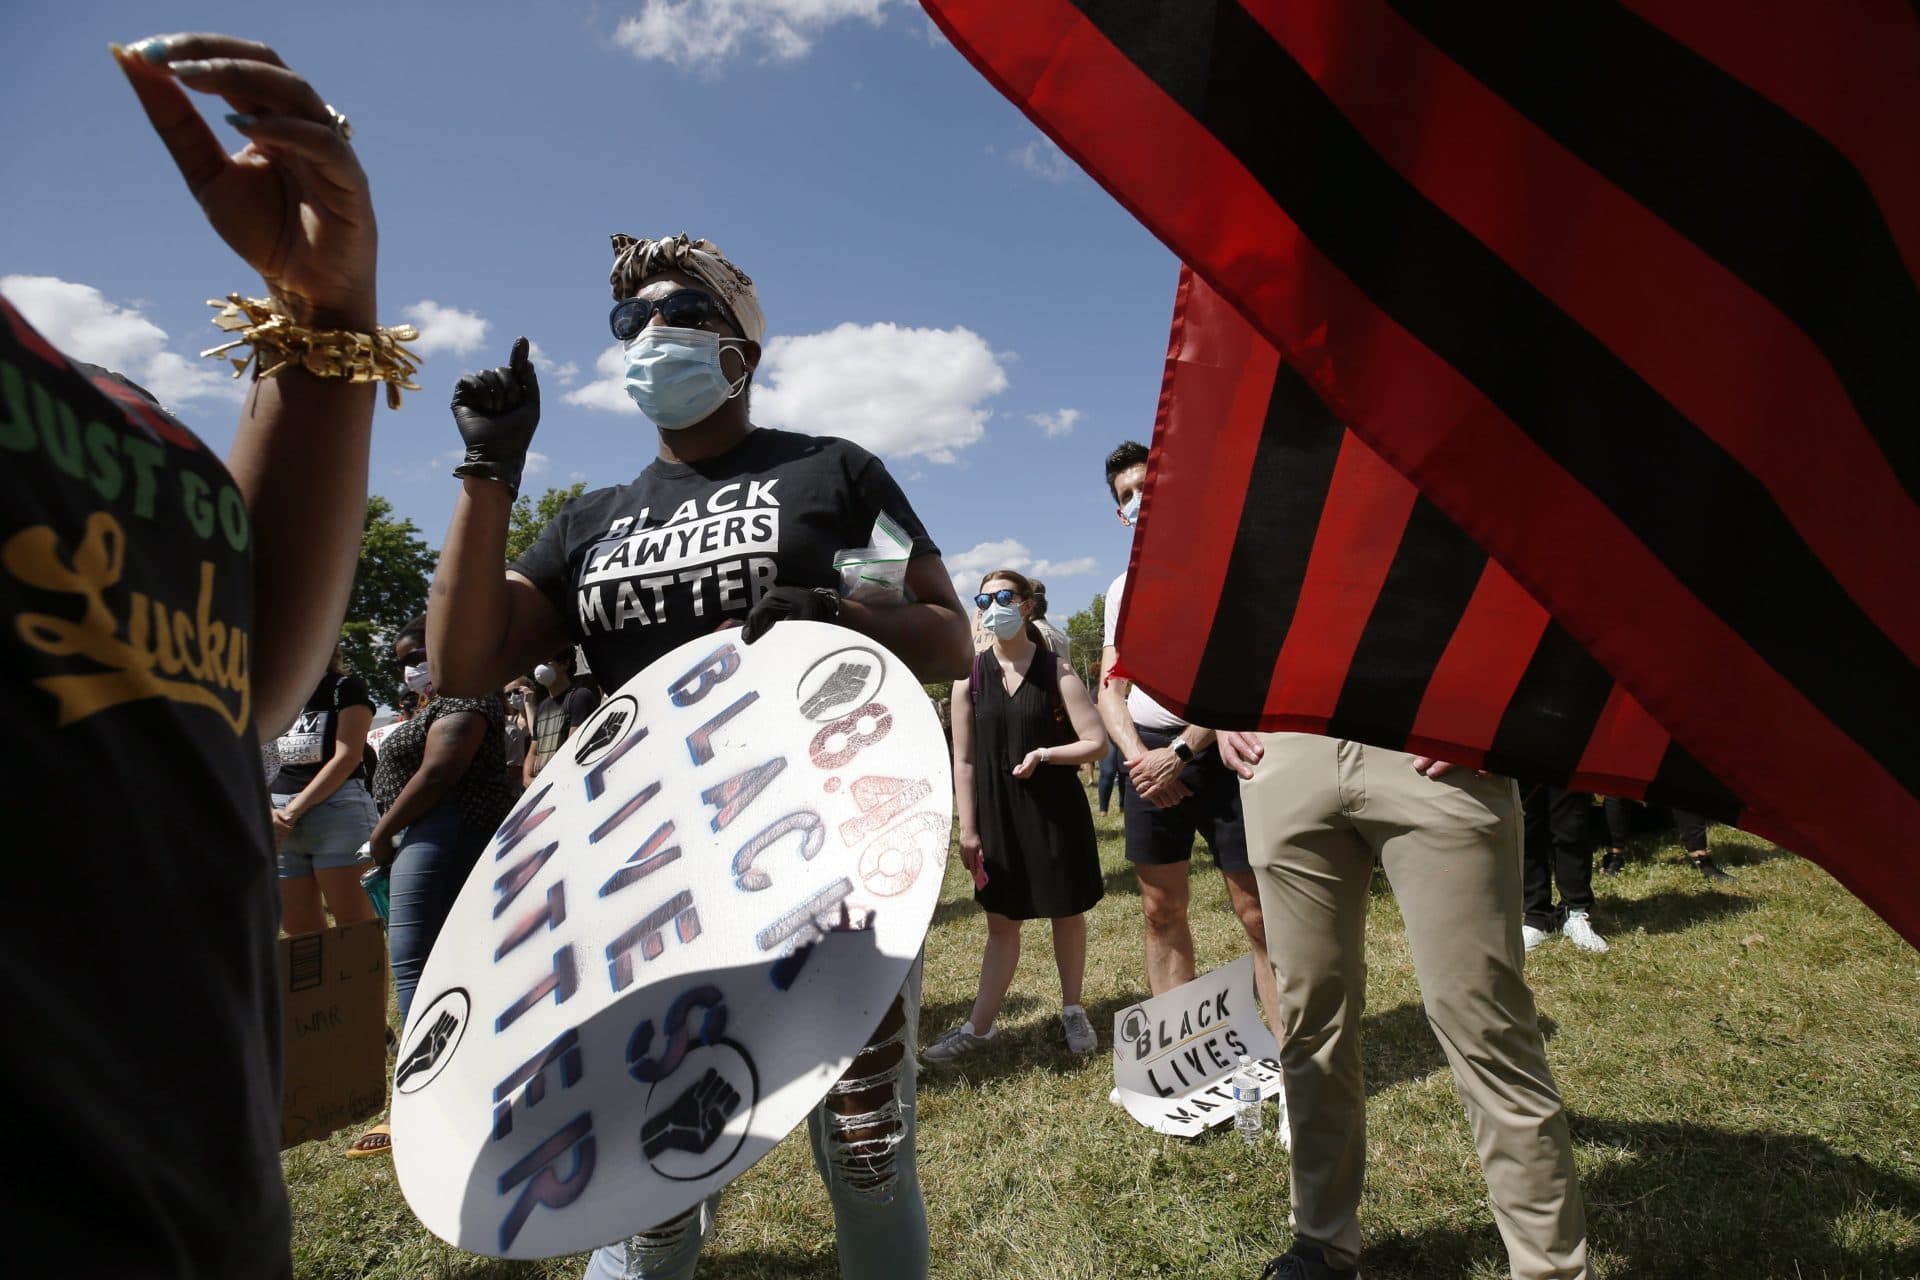 People participate in a Juneteenth rally at Town Field in Dorchester. (Michael Dwyer/AP)